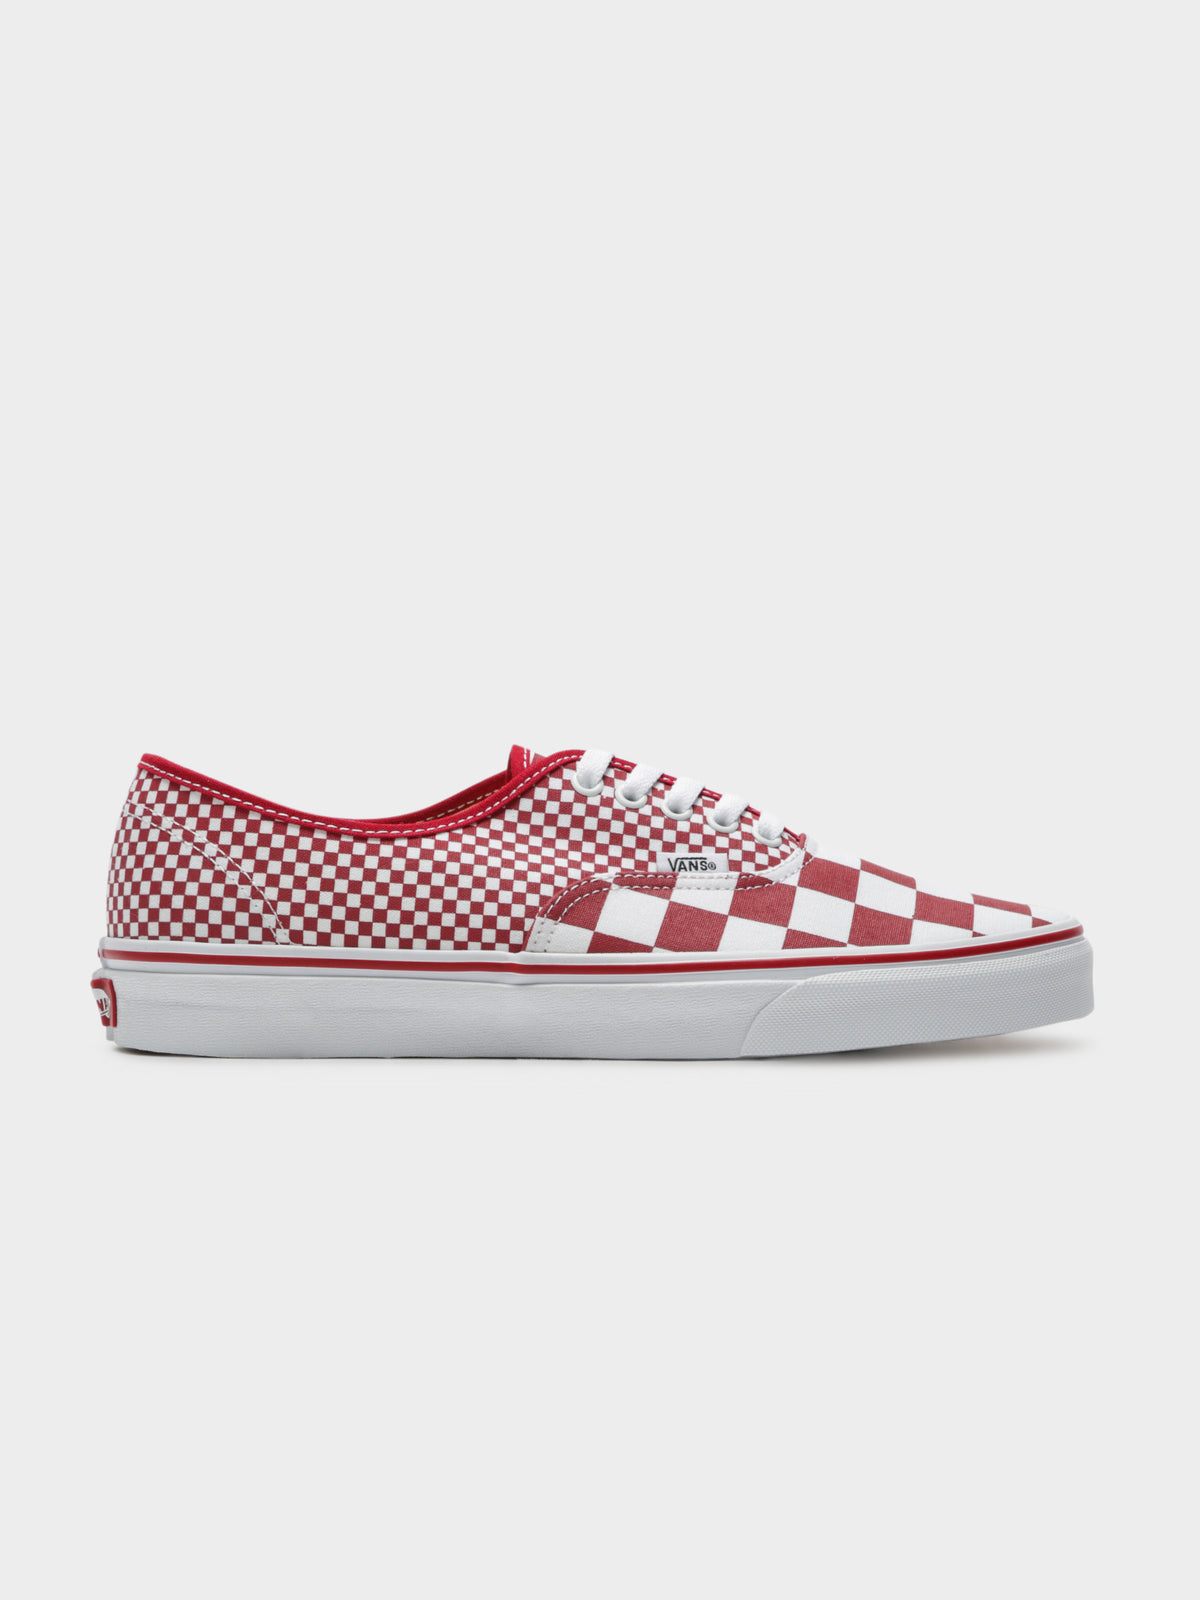 Mens Authentic Mix Checker Sneakers in Chill Pepper Red &amp; True White